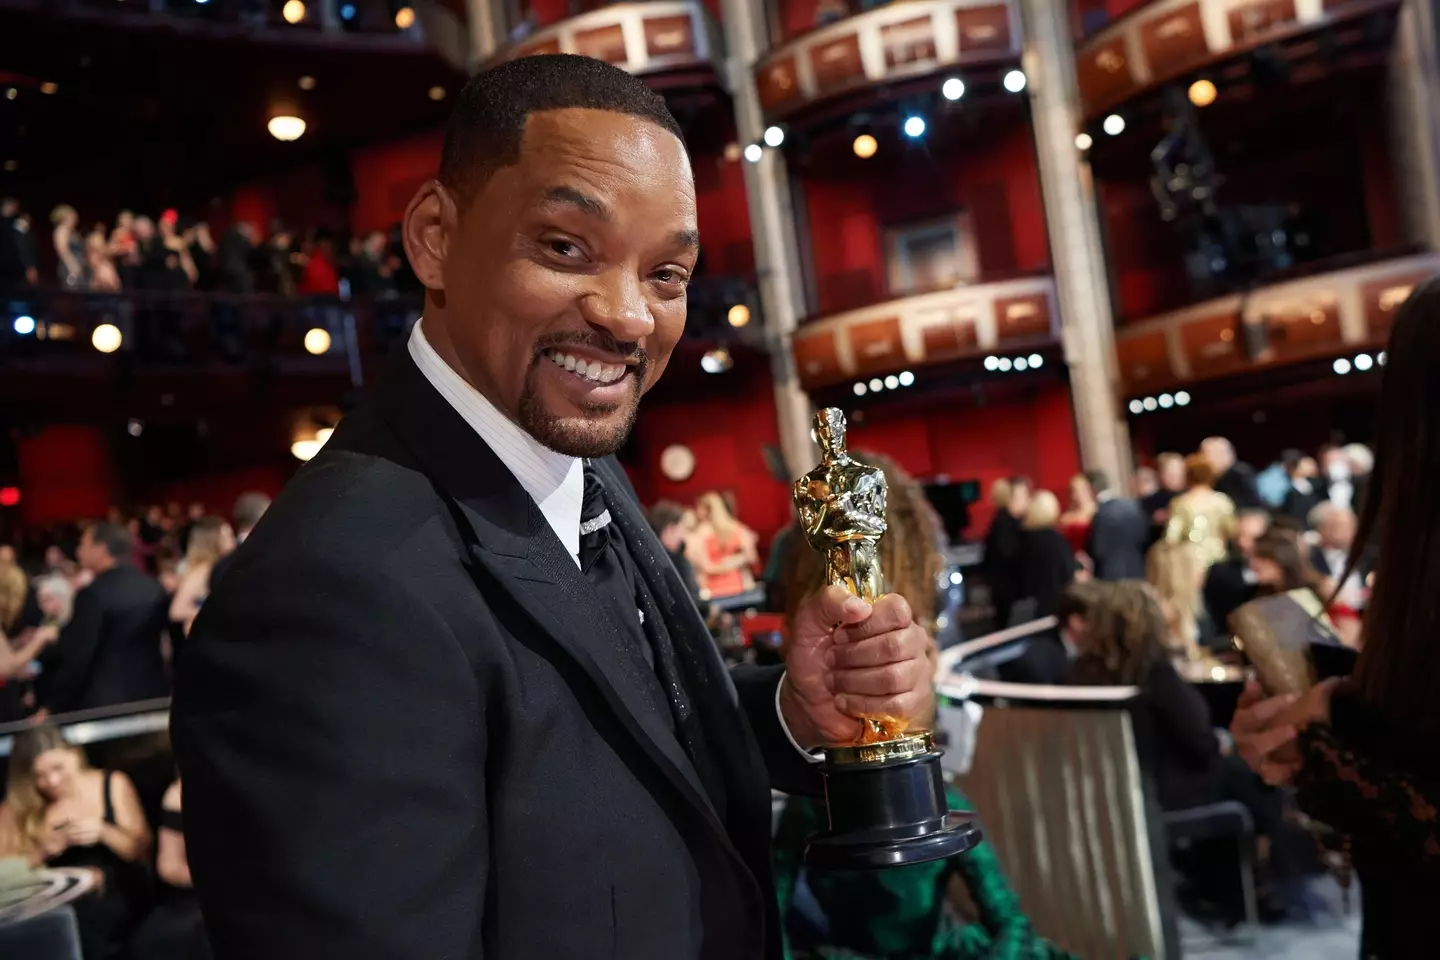 Will Smith won the Oscar for Best Actor.